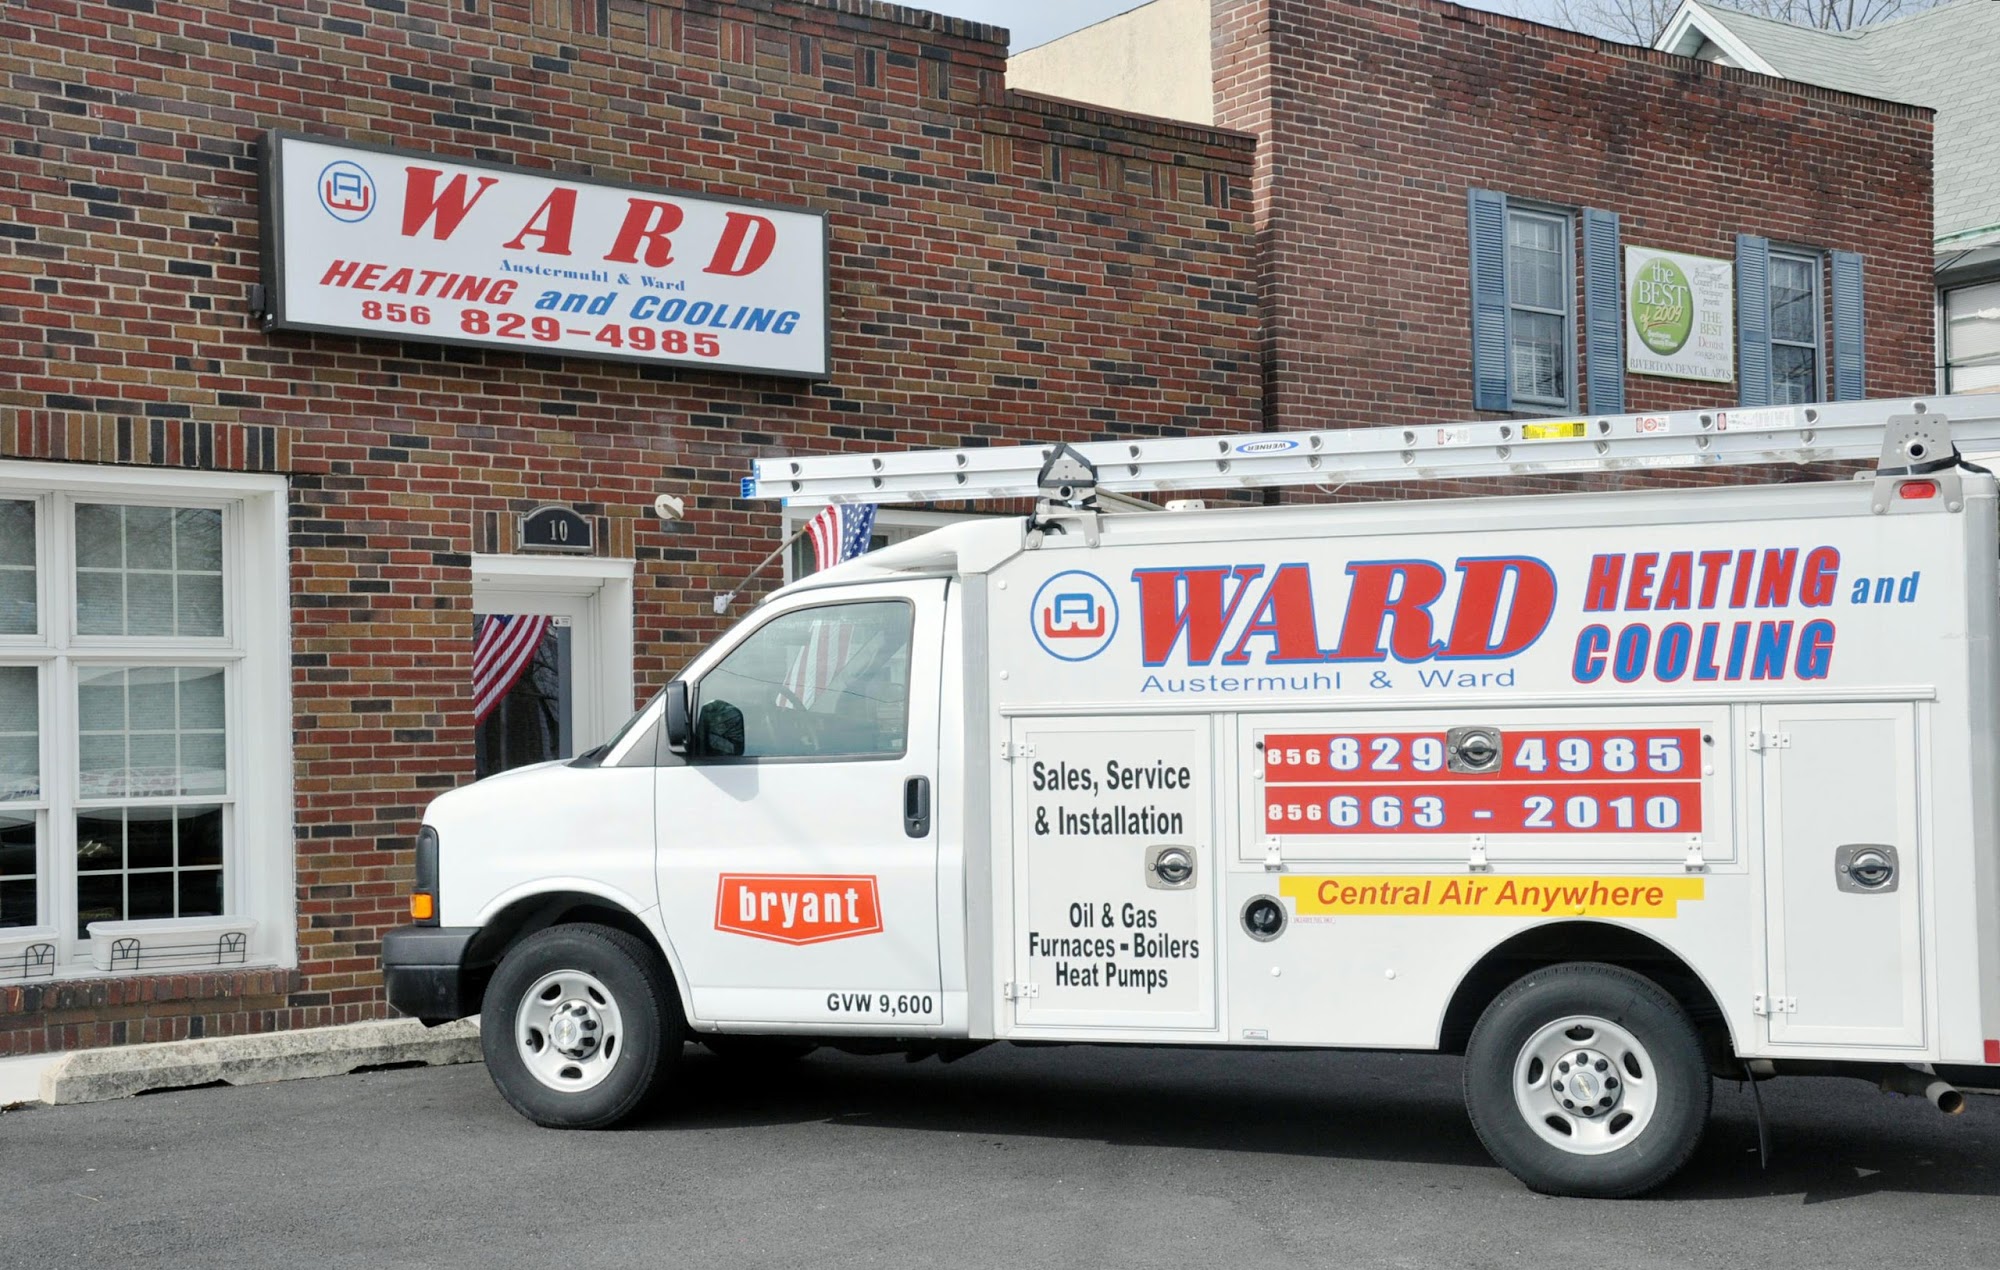 Ward Heating and Cooling